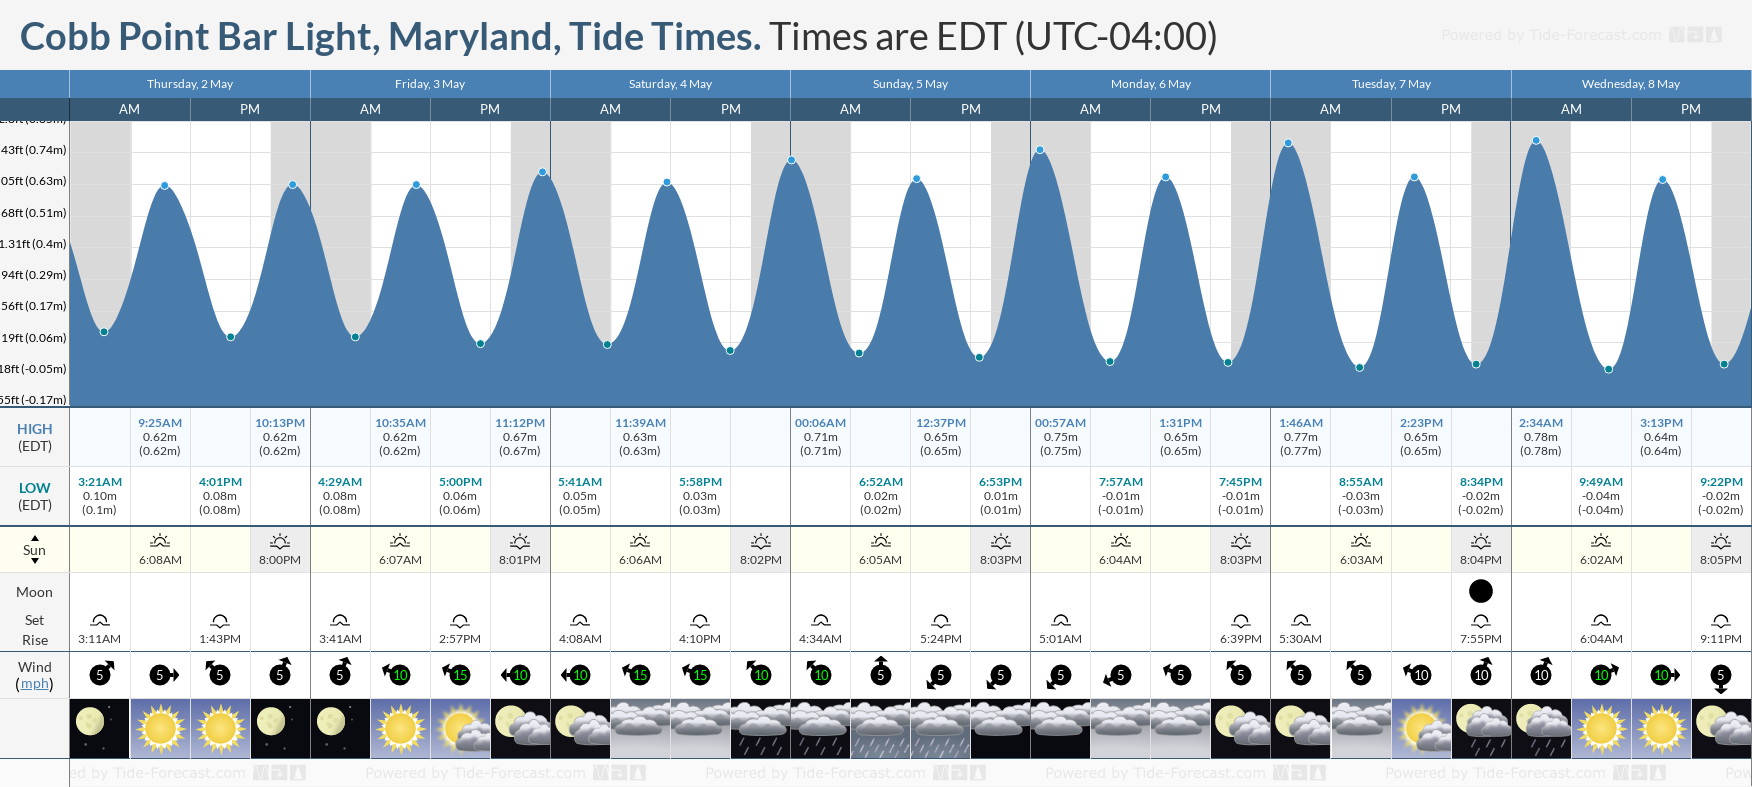 Cobb Point Bar Light, Maryland Tide Chart including high and low tide times for the next 7 days